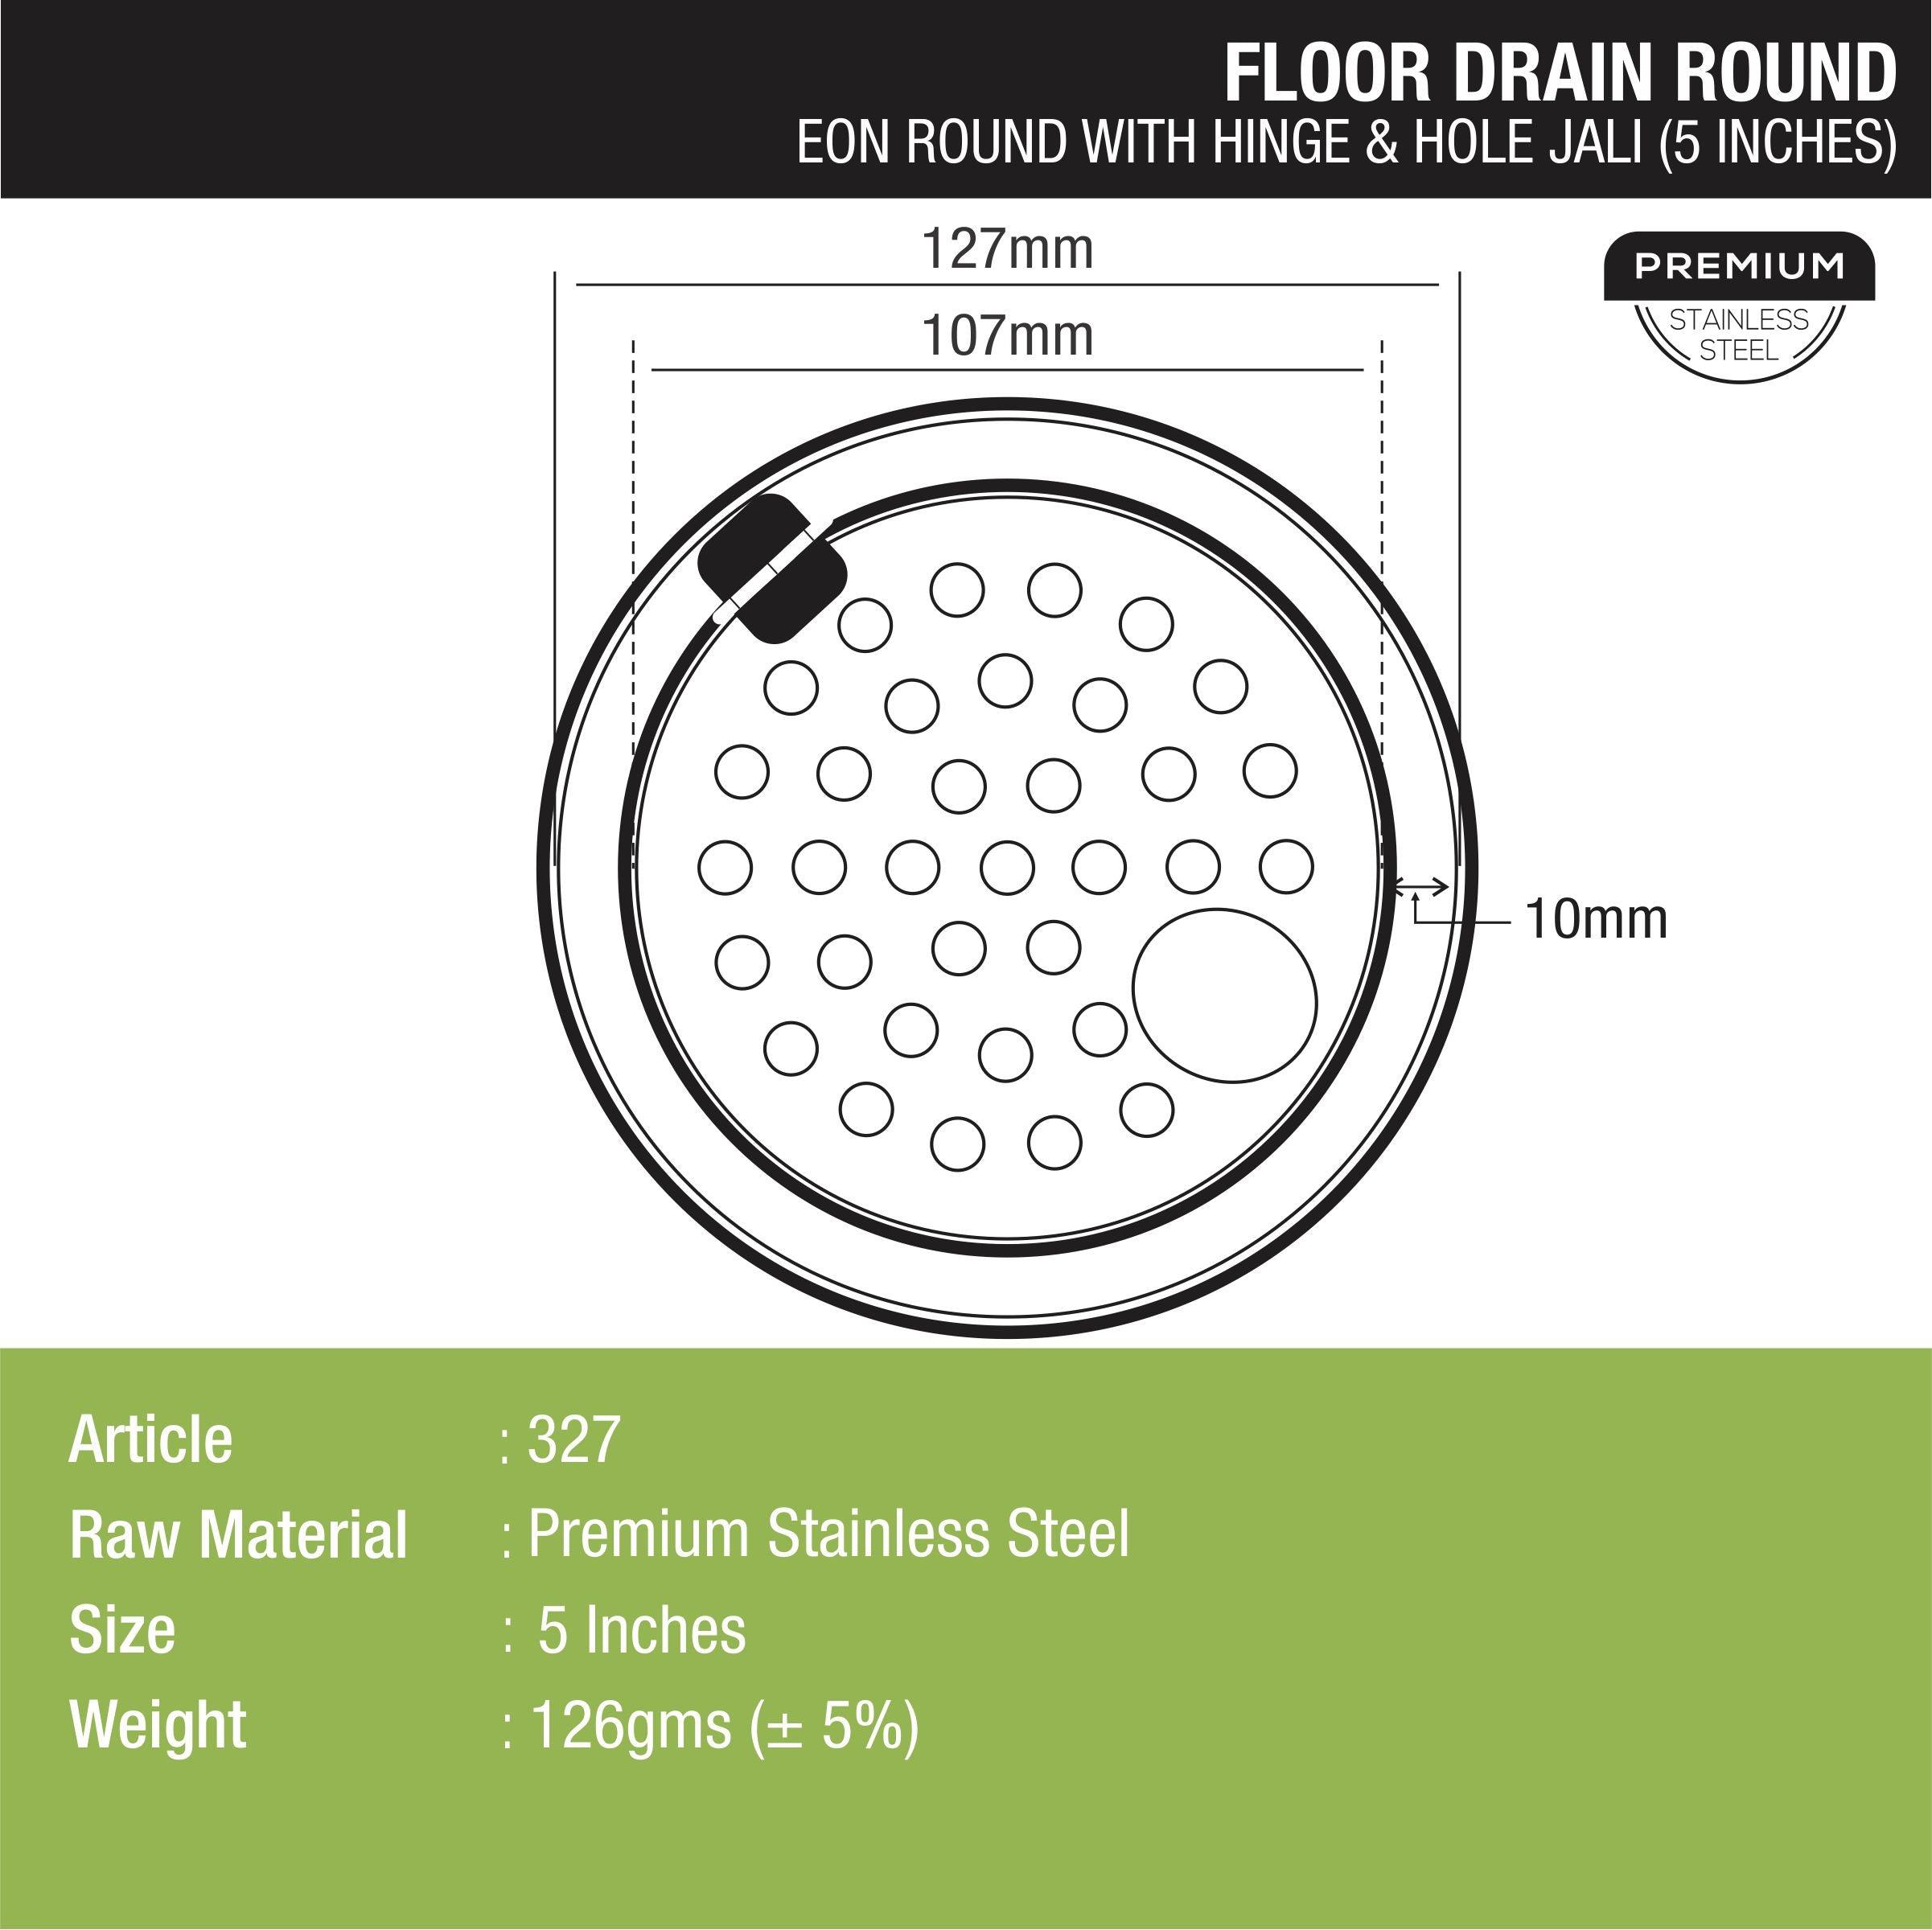 Eon Round Floor Drain with Hinge & Hole (5 inches) dimensions and sizes